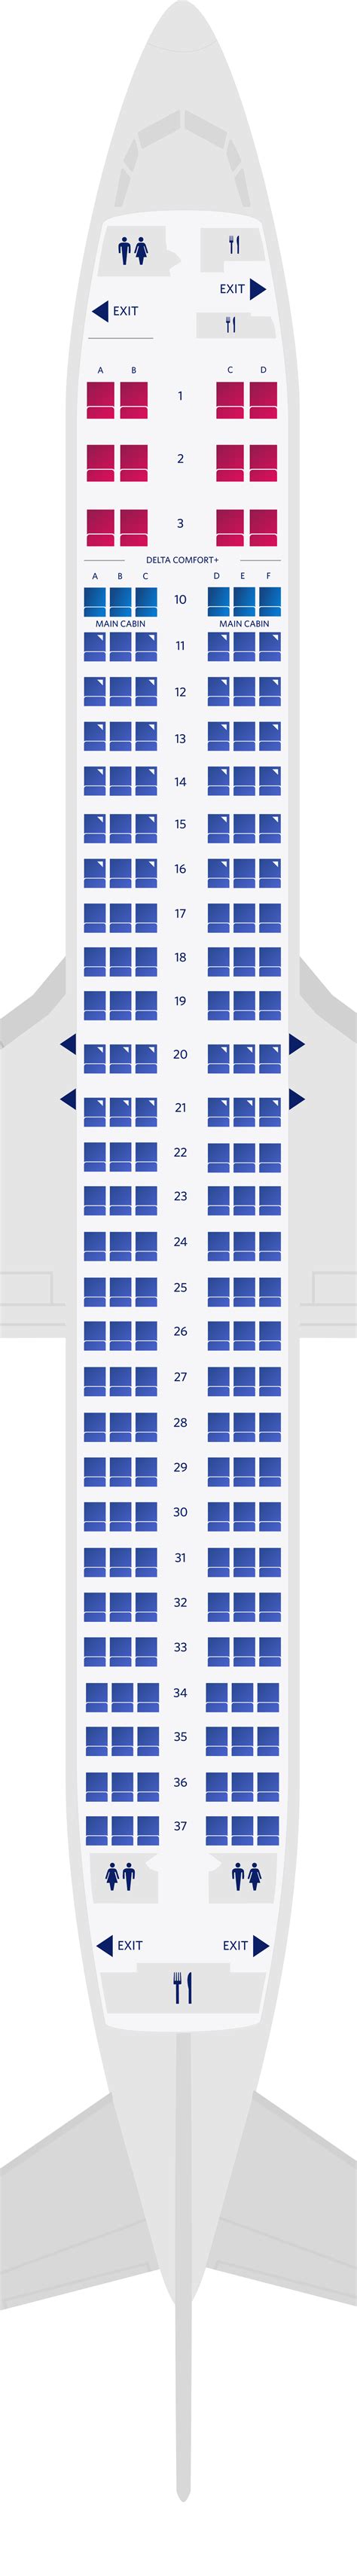 Visit delta.com to learn more. ... Boeing 737-800 (738) Boeing 737-900ER Boeing 757-200 ... Seat Map. Seat Map; EXITS (8) GALLEYS (2) LAVATORIES (3) FIRST CLASS. DELTA COMFORT+. PREFERRED. MAIN CABIN. Aircraft Specifications. CRUISING SPEED.. 